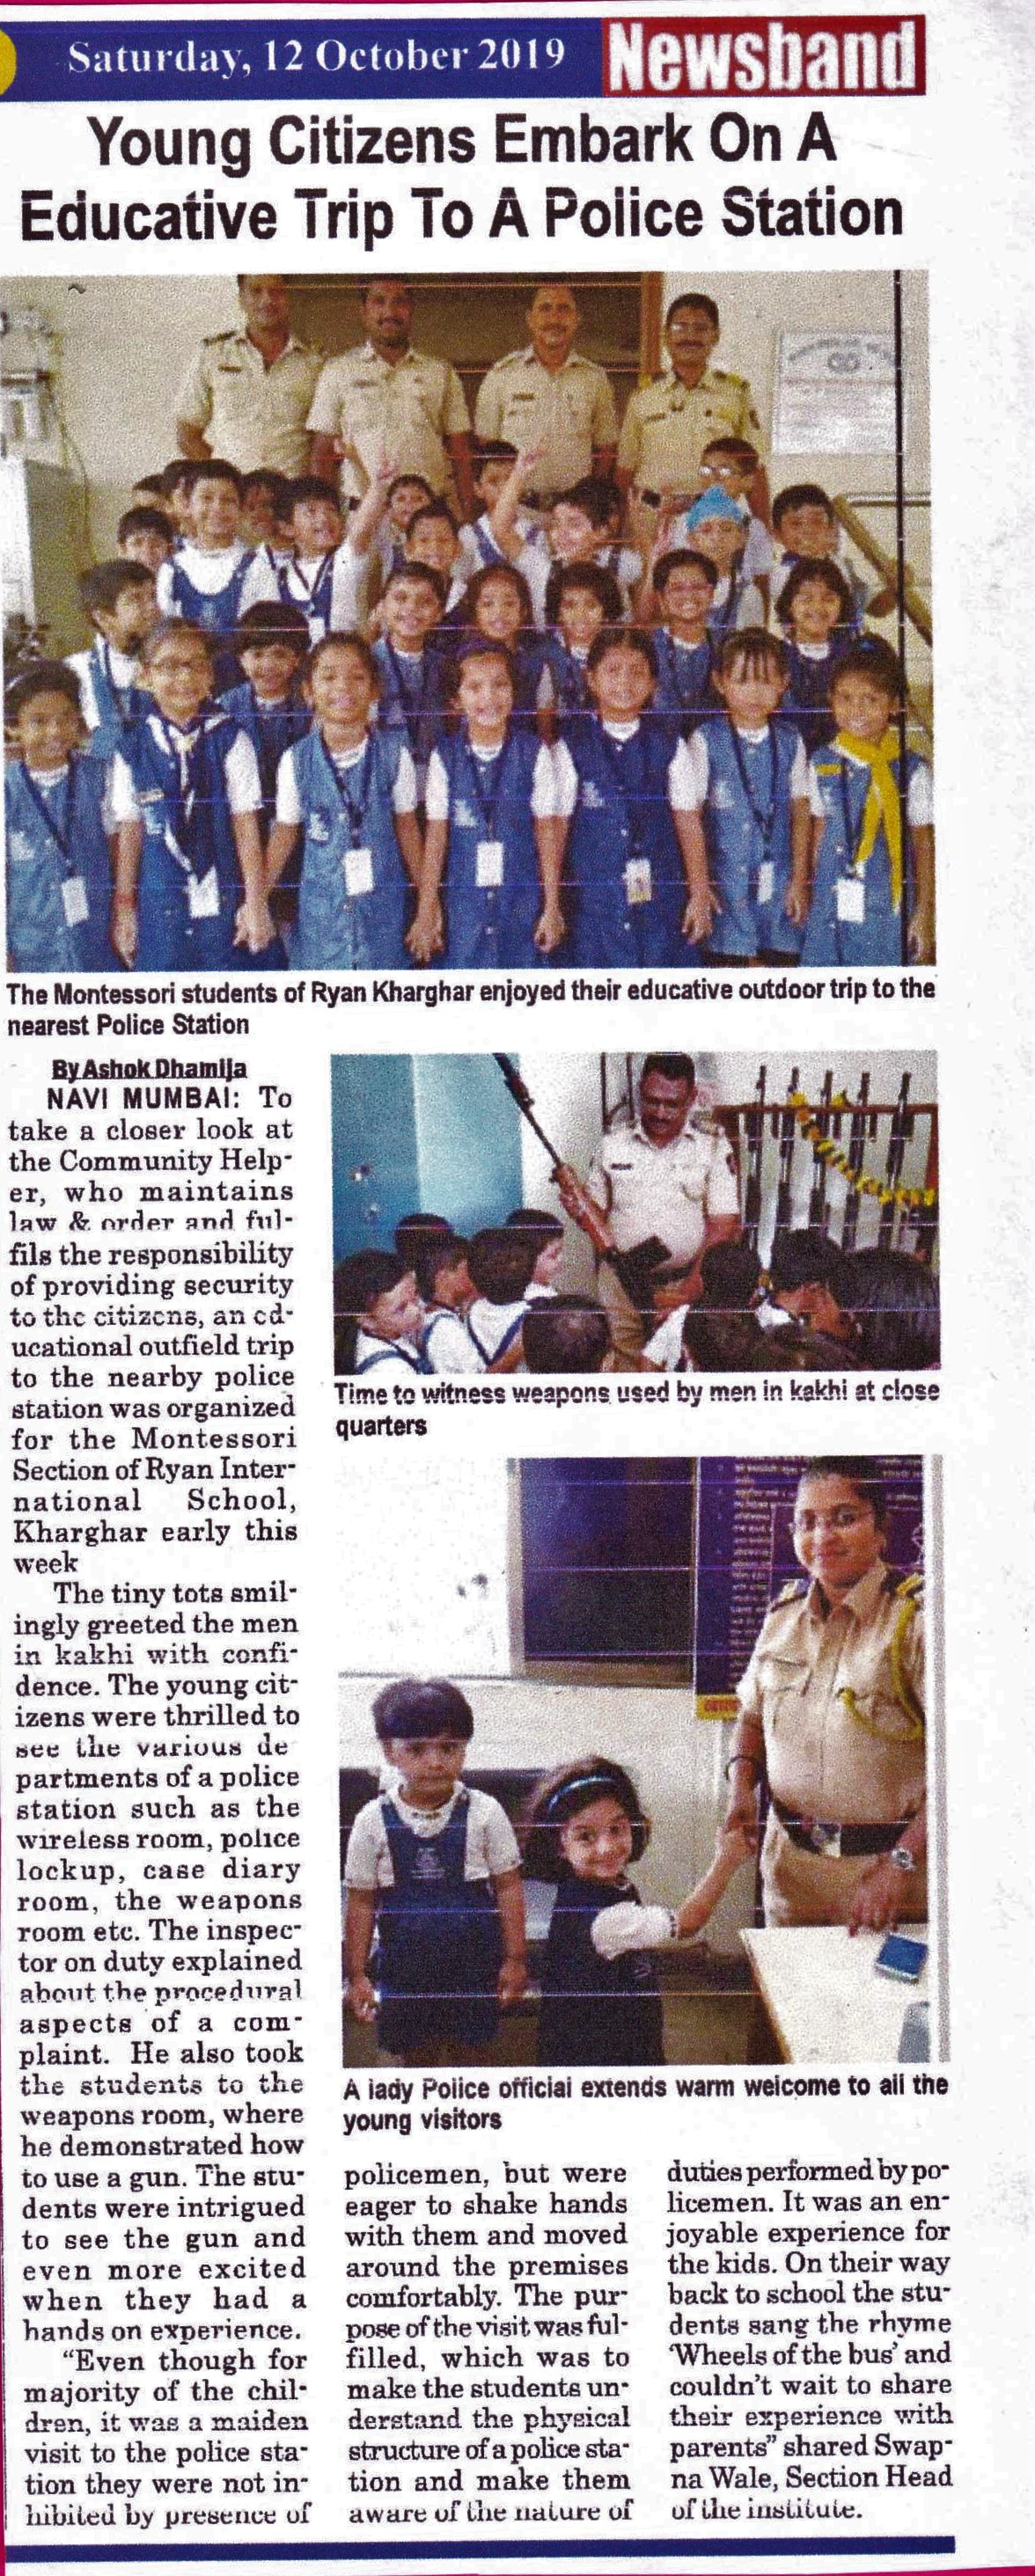 Young Citizens Embark On A educative trip to a police station was mentioned in News band - Ryan International School, Kharghar